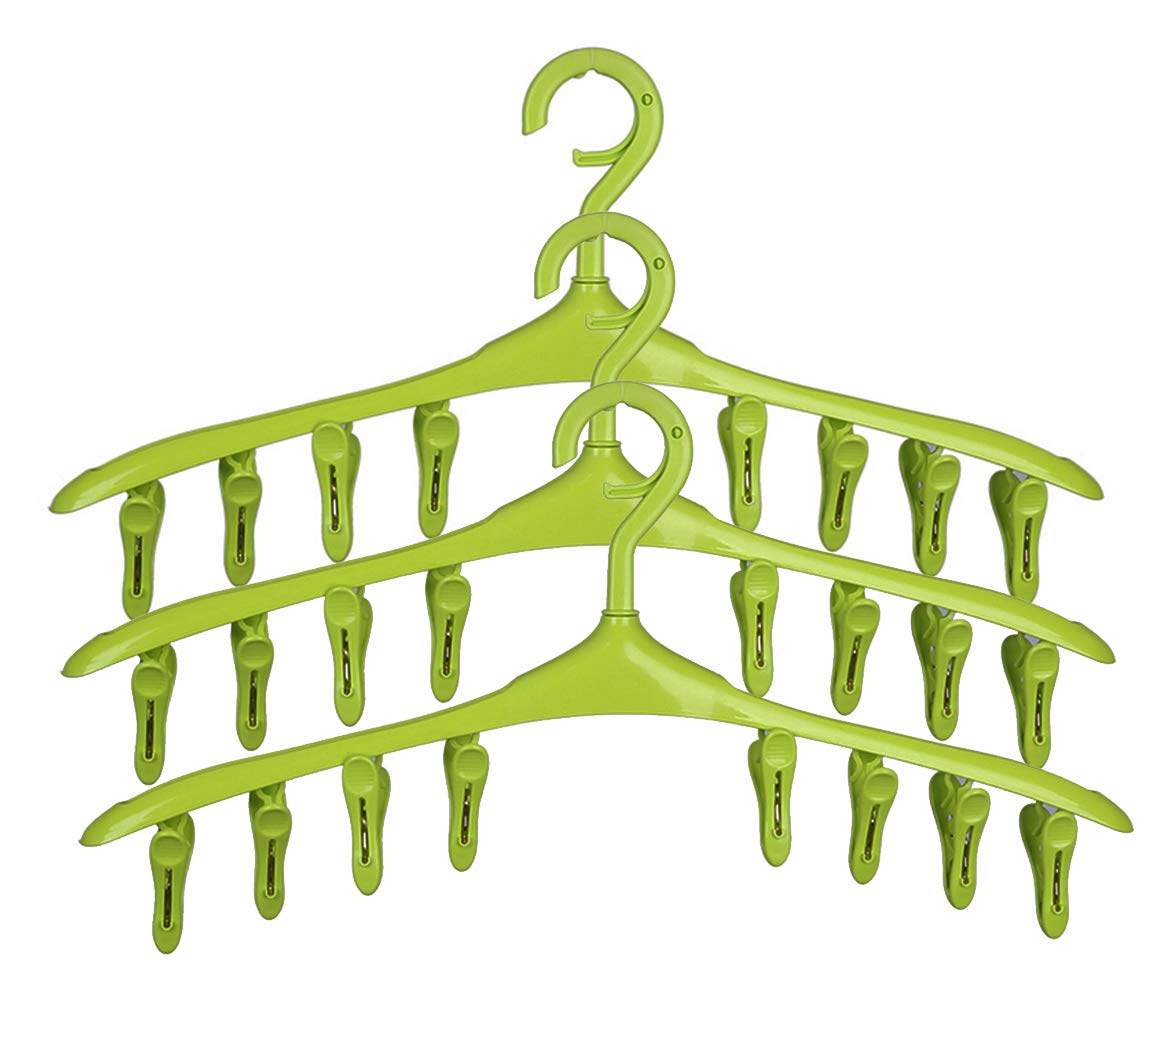 SUOWO Plastic Baby Hangers Coat Clothes Clip and Drip Laundry Swivel Hanger with 8 Clips Non Slip Space Saving for Drying Organizer Kids Infant Diapers Socks Adult Lingerie Pant 3 Pack (Lawngreen)